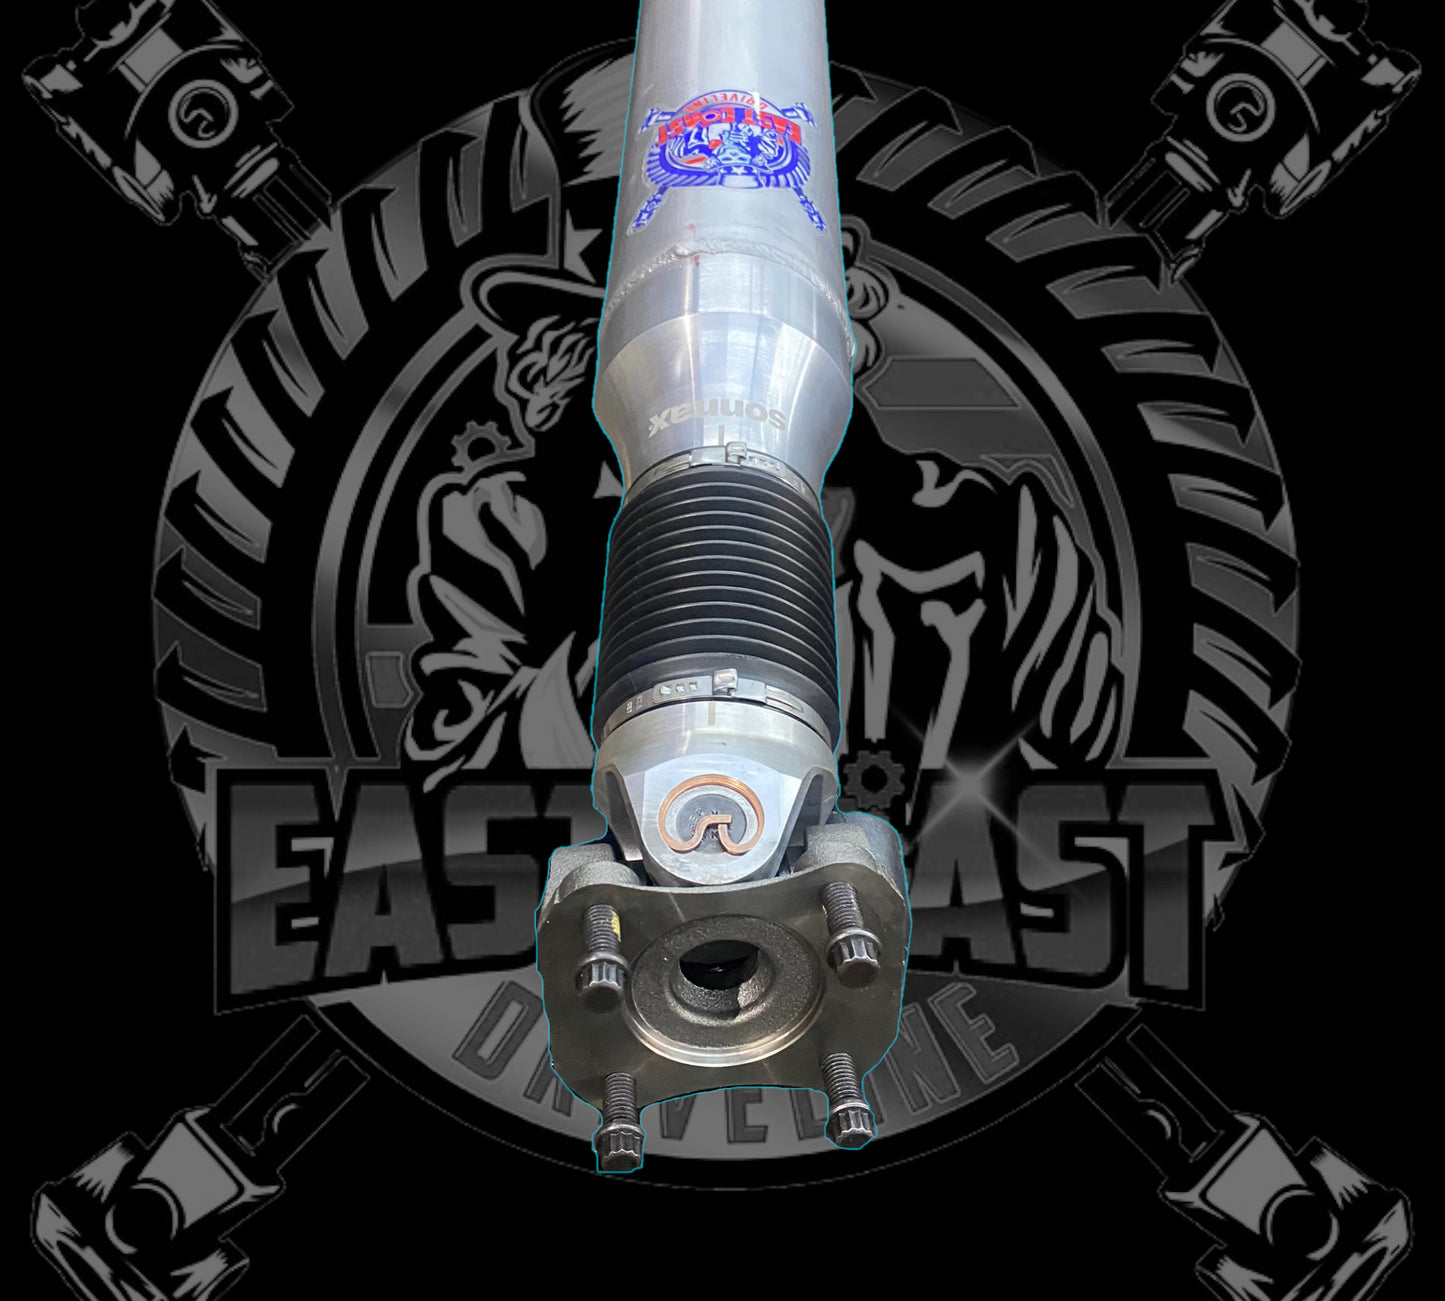 1999-2002 Ford F450 Superduty 7.3L Diesel AWD Dually 165”WB HD 1480 Series 5” Aluminum Slip Driveshaft with New Hardware